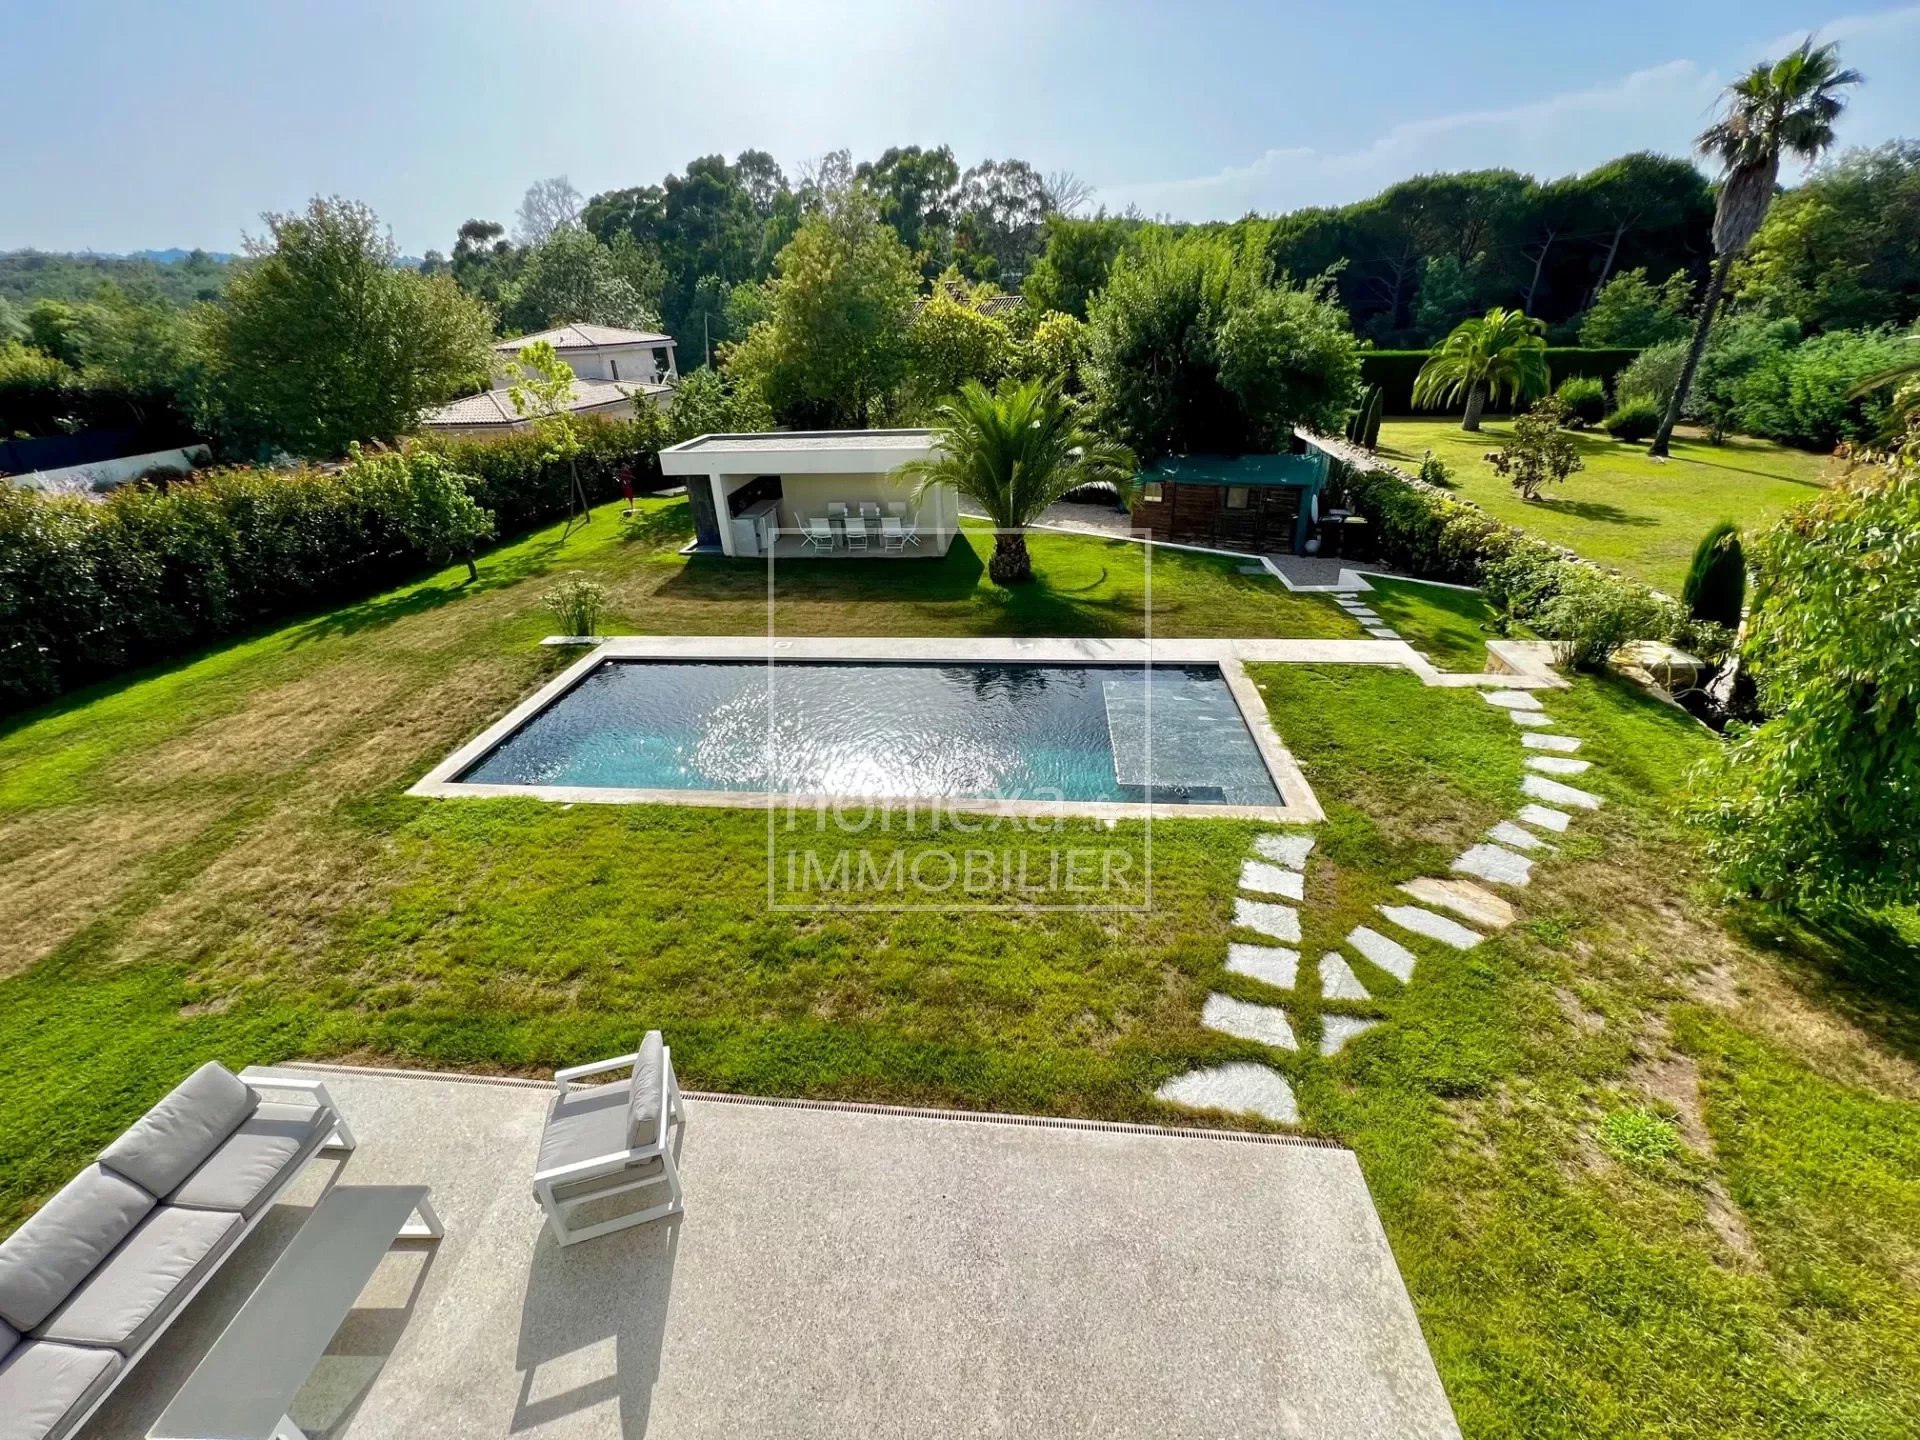 Luxury contemporary villa with pool near Mougins